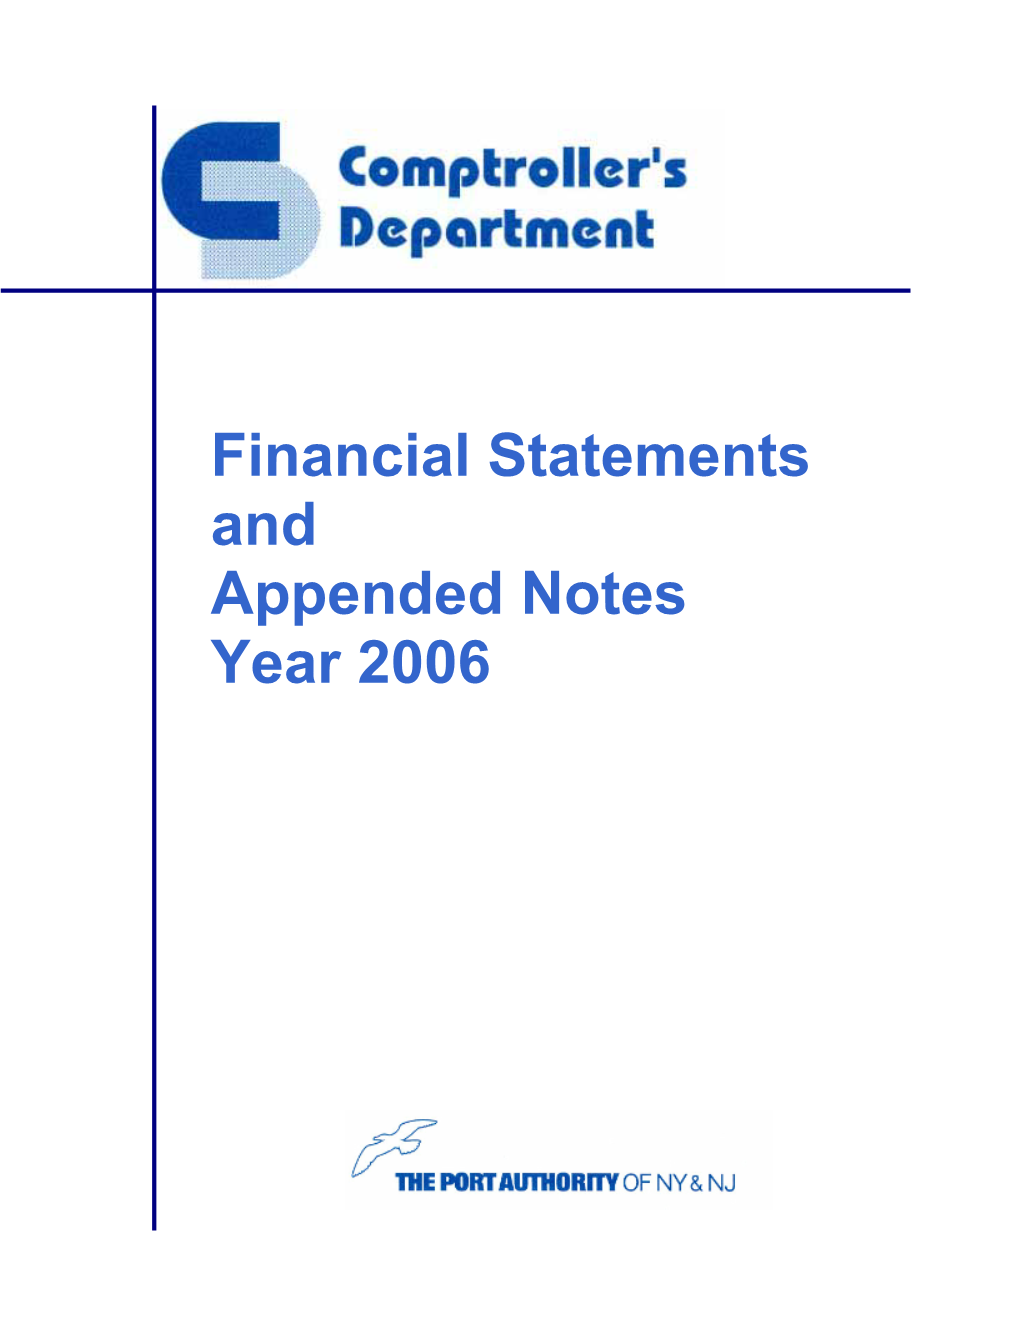 Financial Statements and Appended Notes Year 2006